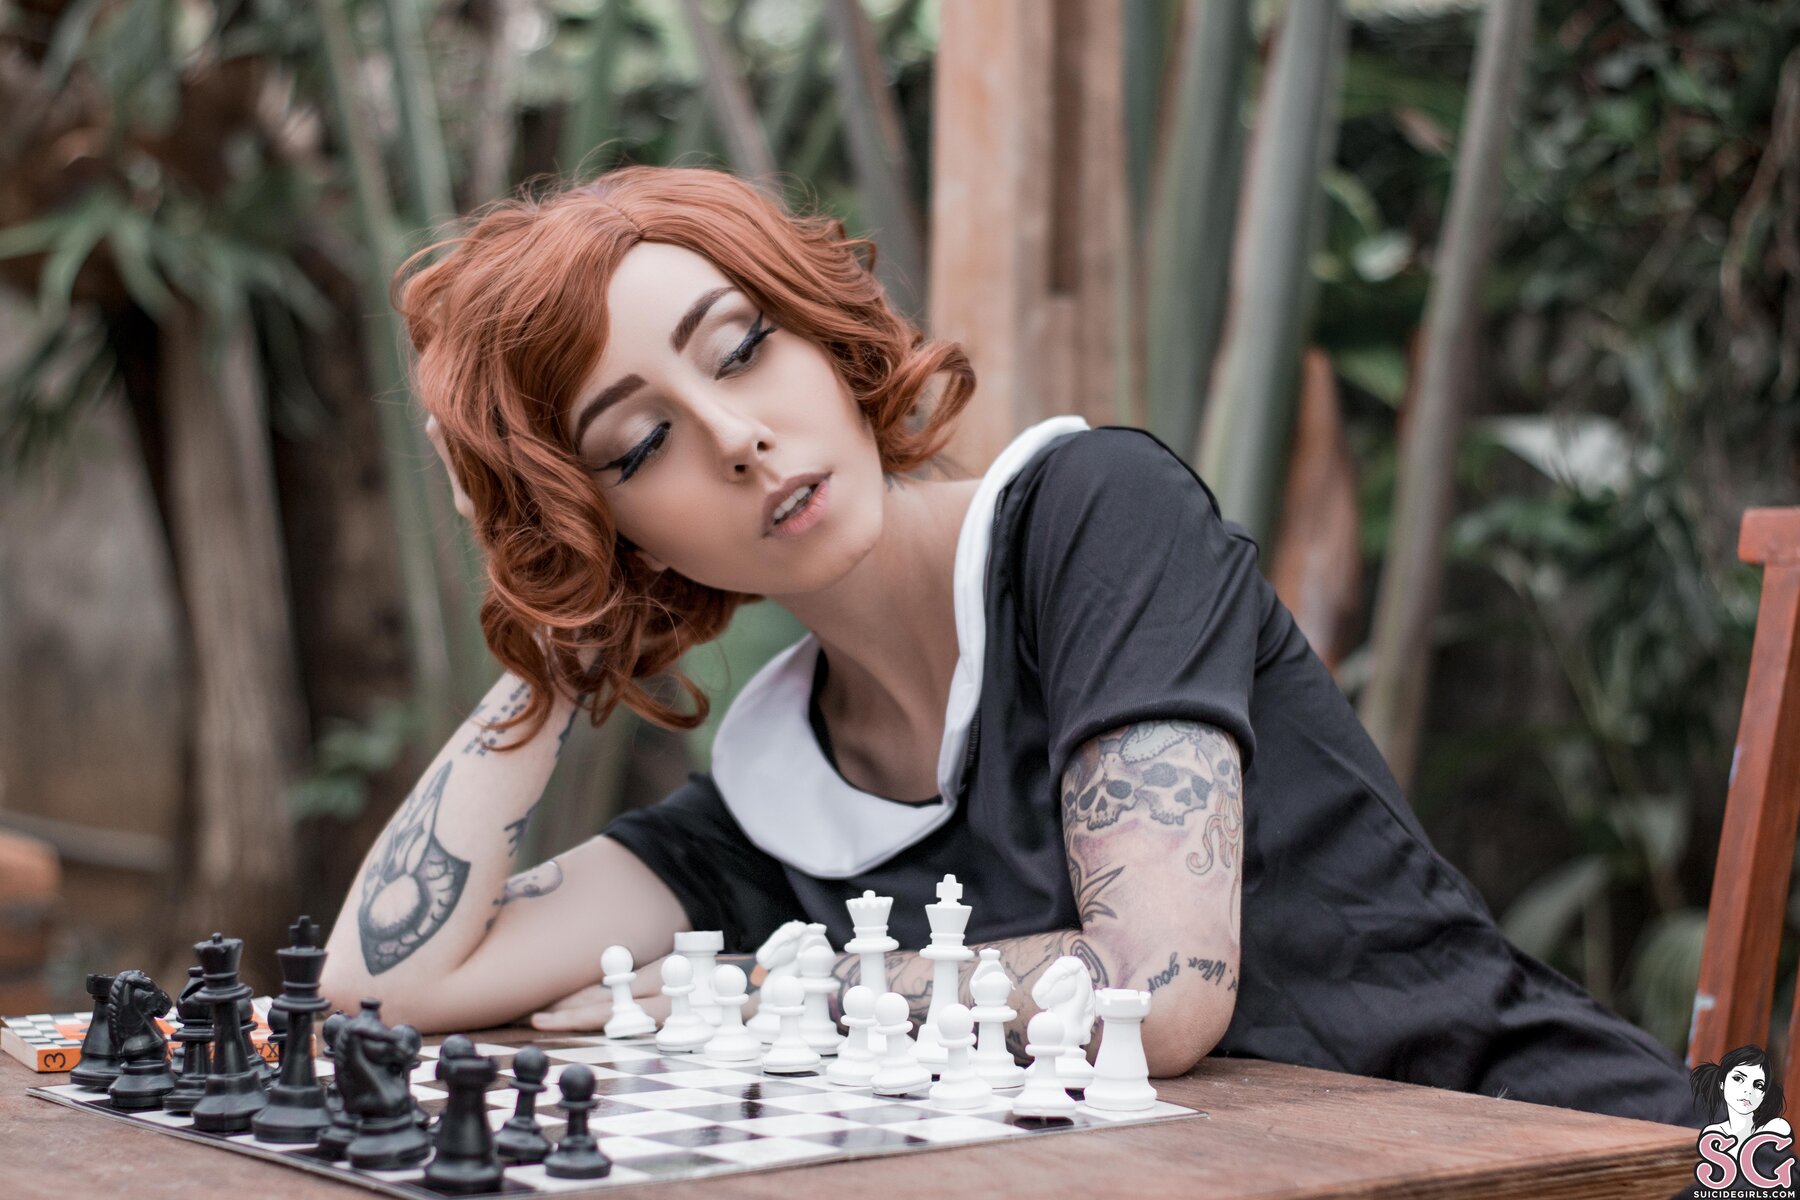 People 1800x1200 Suicide Girls redhead cosplay photography model looking sideways looking away table hand(s) on head women open mouth tattoo tattoo sleeve chess short hair Beth Harmon depth of field outdoors women outdoors sitting The Queen's Gambit Evelyn Oliveira